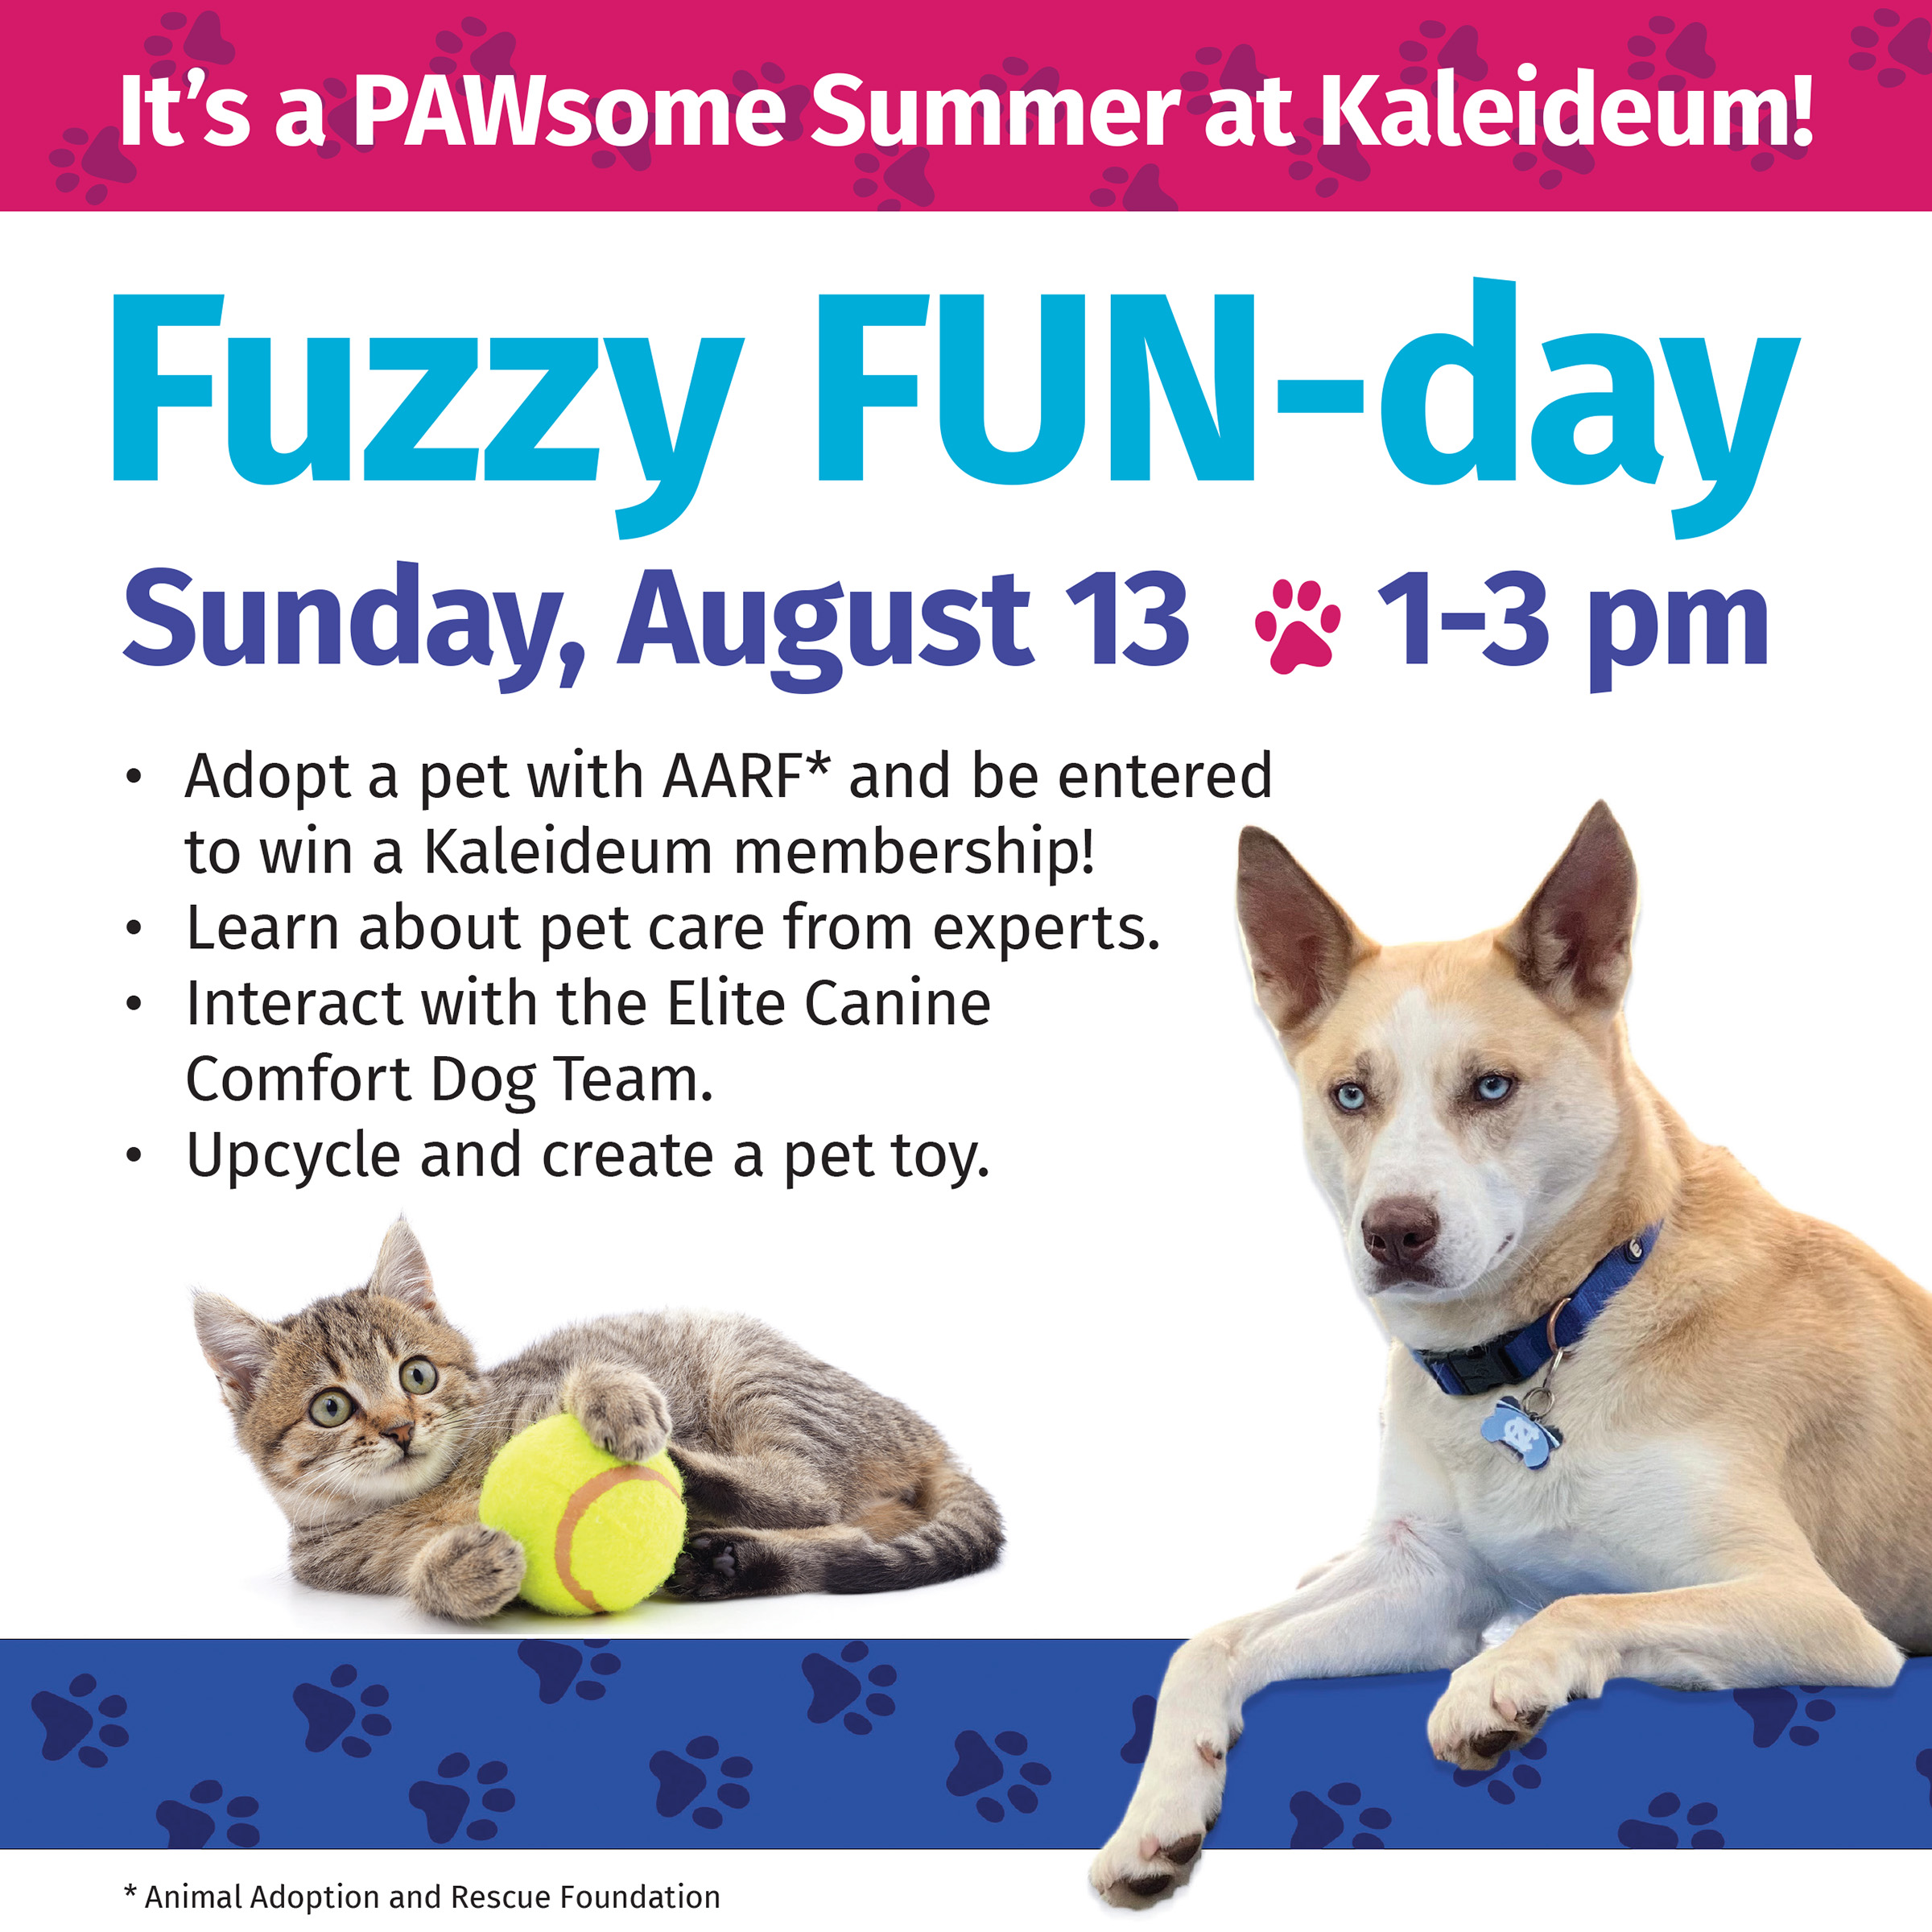 It's a PAWsome Summer at Kaleideum! Fuzzy FUN-day Sunday, August 13 1-3 pm Adopt a pet with AARF* and be entered to win a Kaleideum membership! Learn about pet care from experts. Interact with the Elite Canine Comfort Dog Team. Upcycle and create a pet toy.